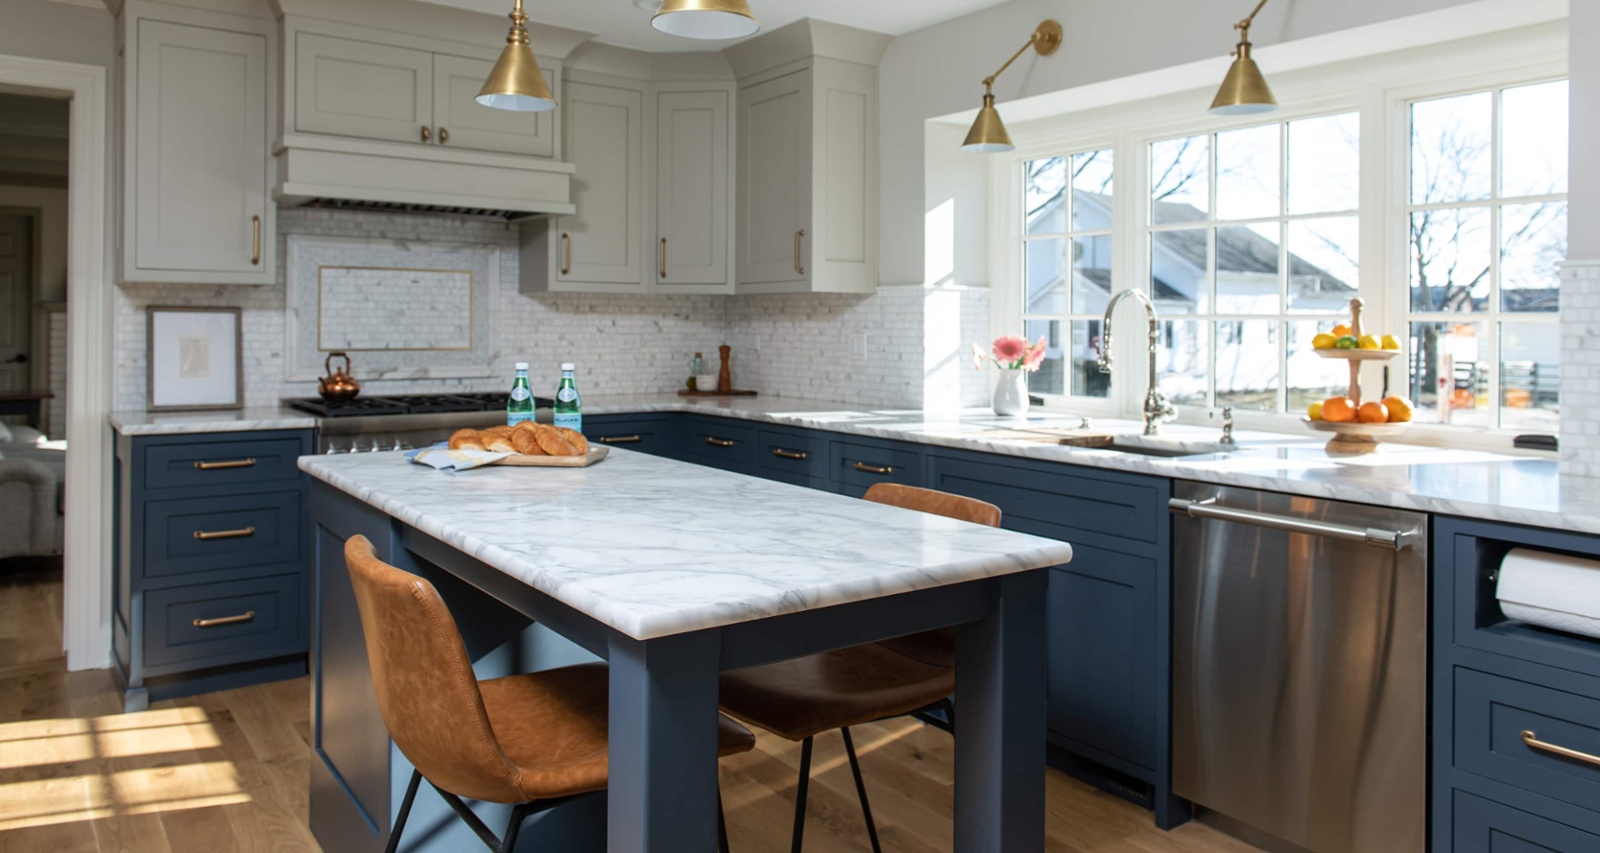 kitchen remodel with two best colors for kitchen cabinets - hale navy and Revere Pewter-1-1